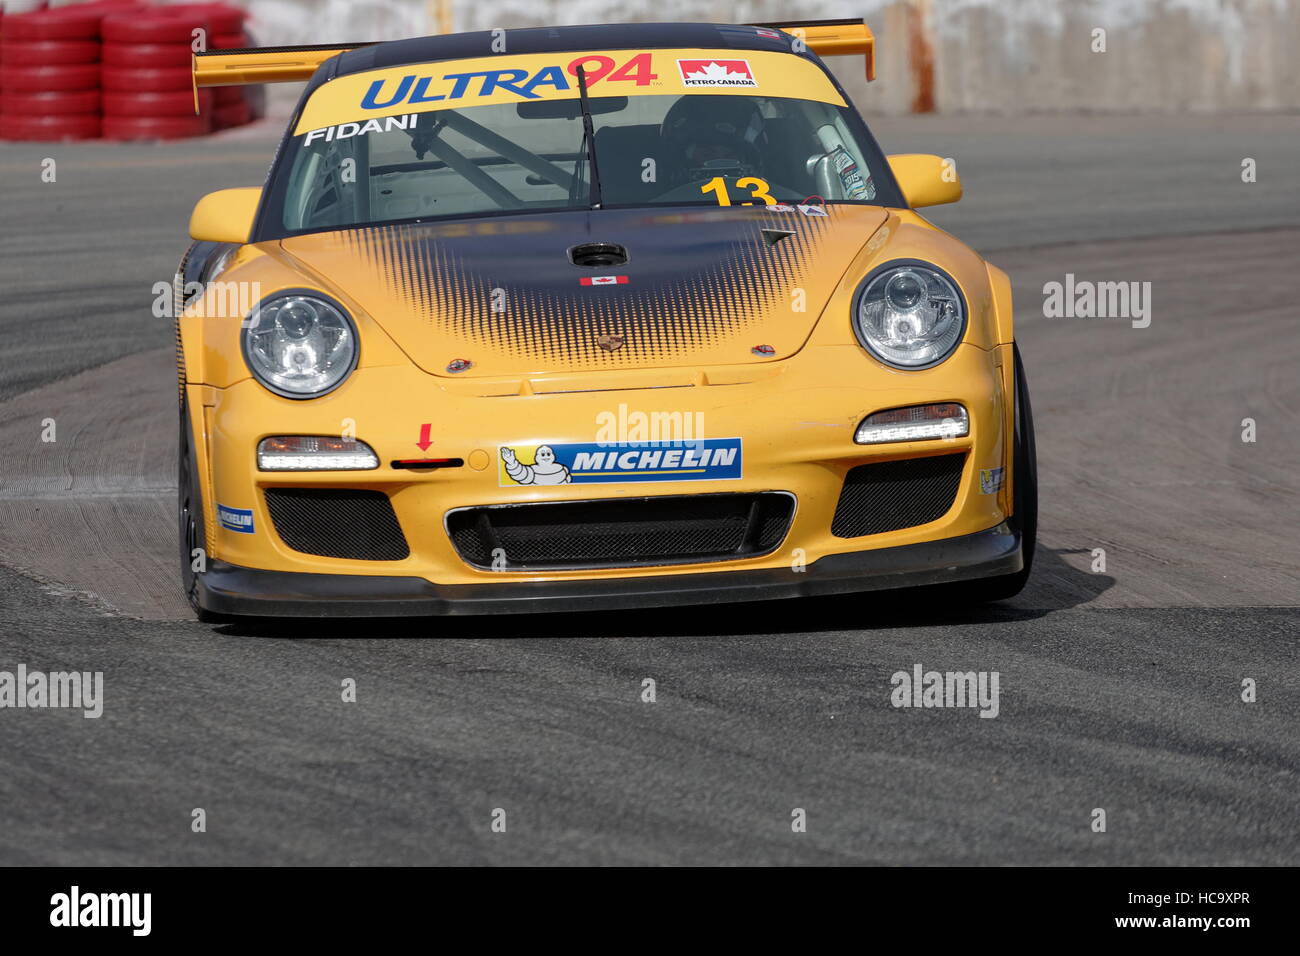 Car number 13, Orey Fidani competing in the Porsche GT3 Cup Challenge Canada at the GP3R in Trois-Rivieres, Quebec Stock Photo